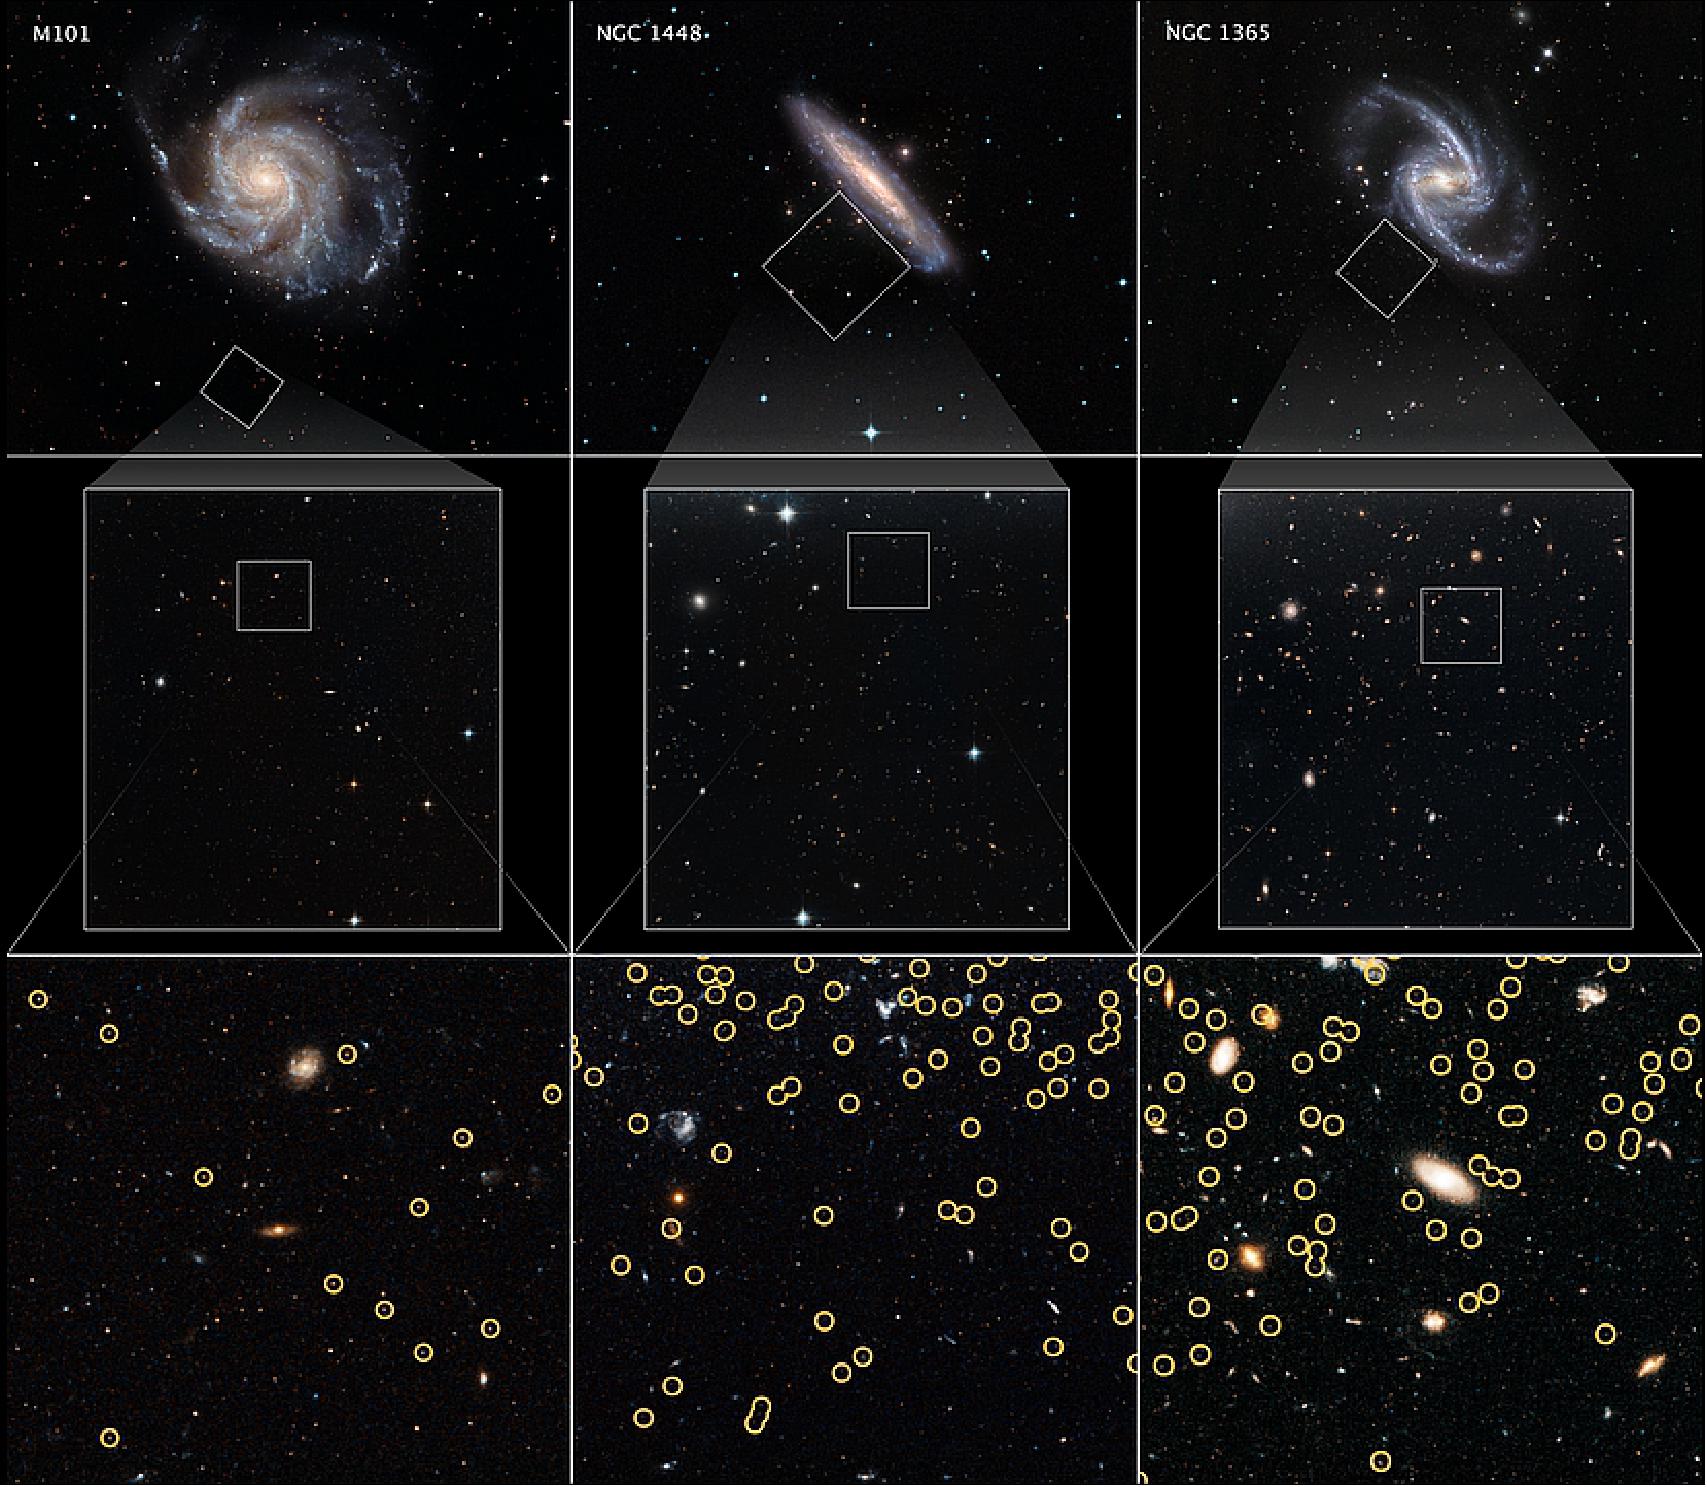 Figure 36: These galaxies are selected from a Hubble Space Telescope program to measure the expansion rate of the universe, called the Hubble constant. The value is calculated by comparing the galaxies' distances to the apparent rate of recession away from Earth (due to the relativistic effects of expanding space). - By comparing the apparent brightnesses of the galaxies' red giant stars with nearby red giants, whose distances were measured with other methods, astronomers are able to determine how far away each of the host galaxies are. This is possible because red giants are reliable milepost markers because they all reach the same peak brightness in their late evolution. And, this can be used as a "standard candle" to calculate distance. Hubble's exquisite sharpness and sensitivity allowed for red giants to be found in the stellar halos of the host galaxies. - The red giants were searched for in the halos of the galaxies. The center row shows Hubble's full field of view. The bottom row zooms even tighter into the Hubble fields. The red giants are identified by yellow circles (image credit: NASA/ESA, W. Freedman (University of Chicago), ESO, and the Digitized Sky Survey)